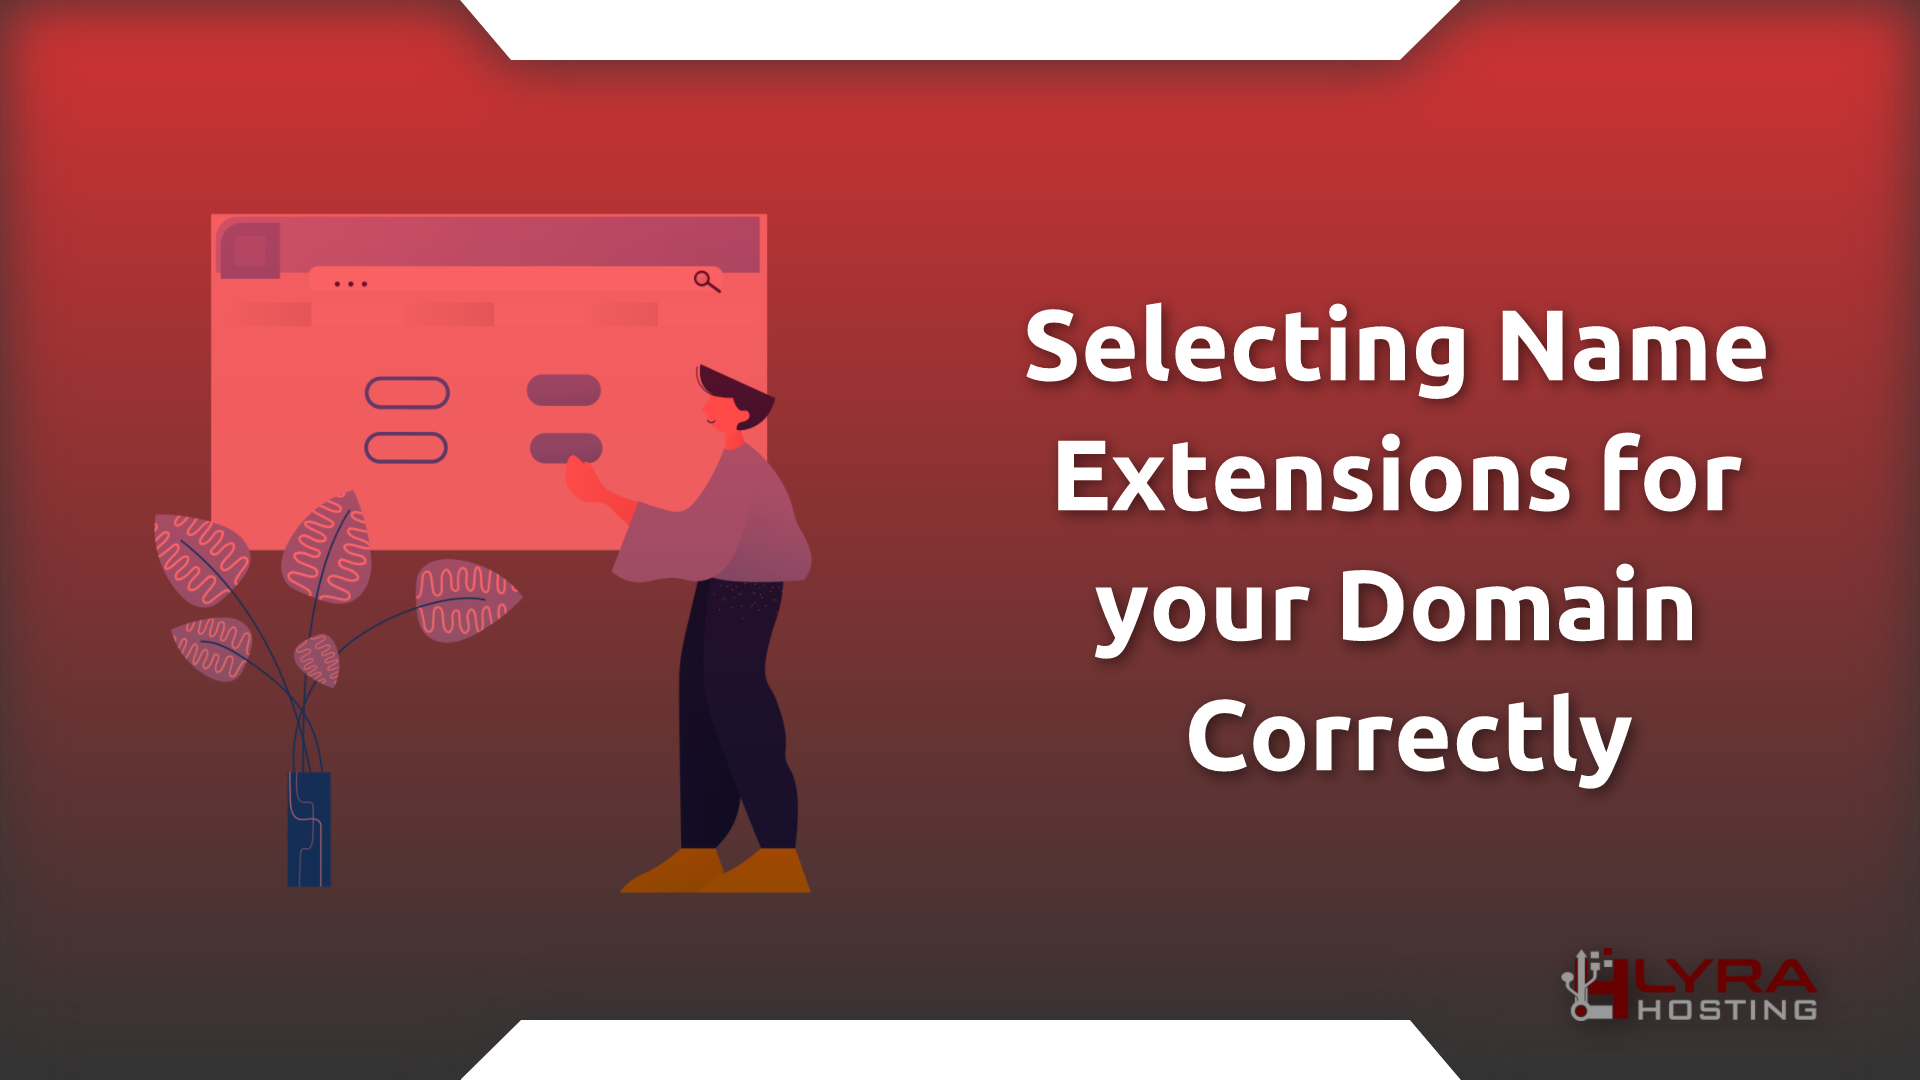 Selecting Name Extensions for your Domain Correctly